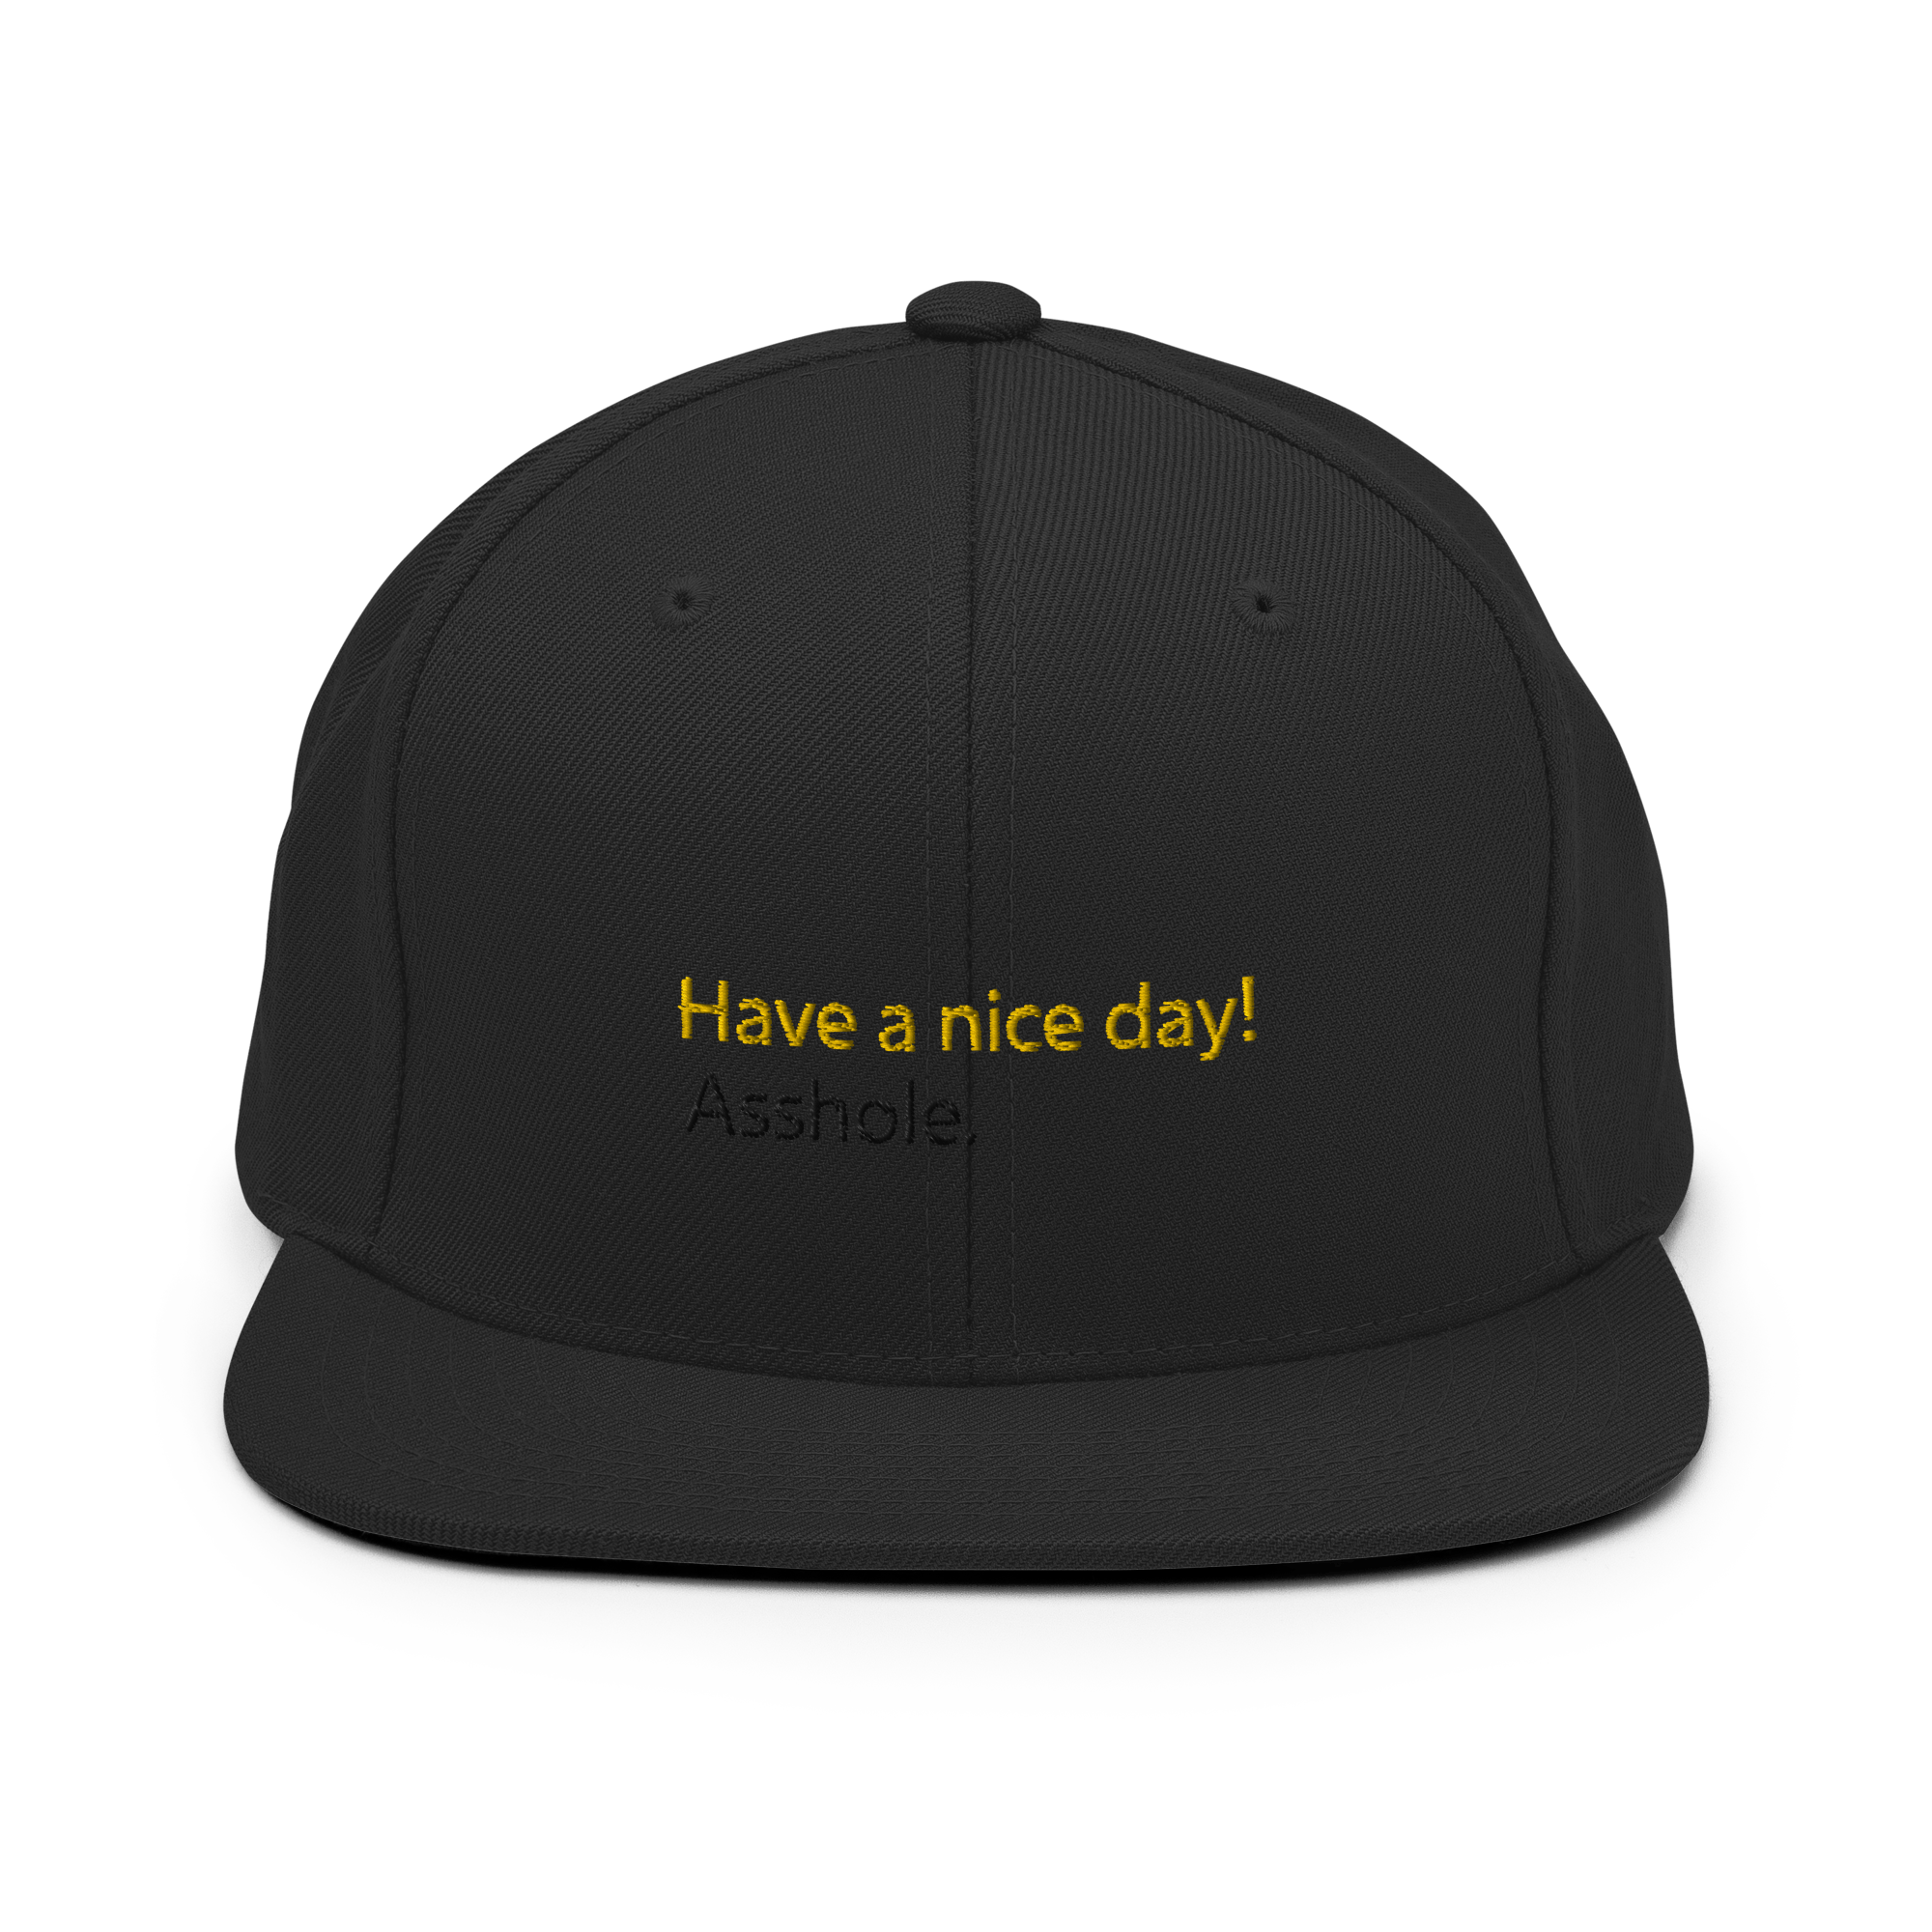 Have a nice day! (asshole) Snapback hat – Just Another Cap Store